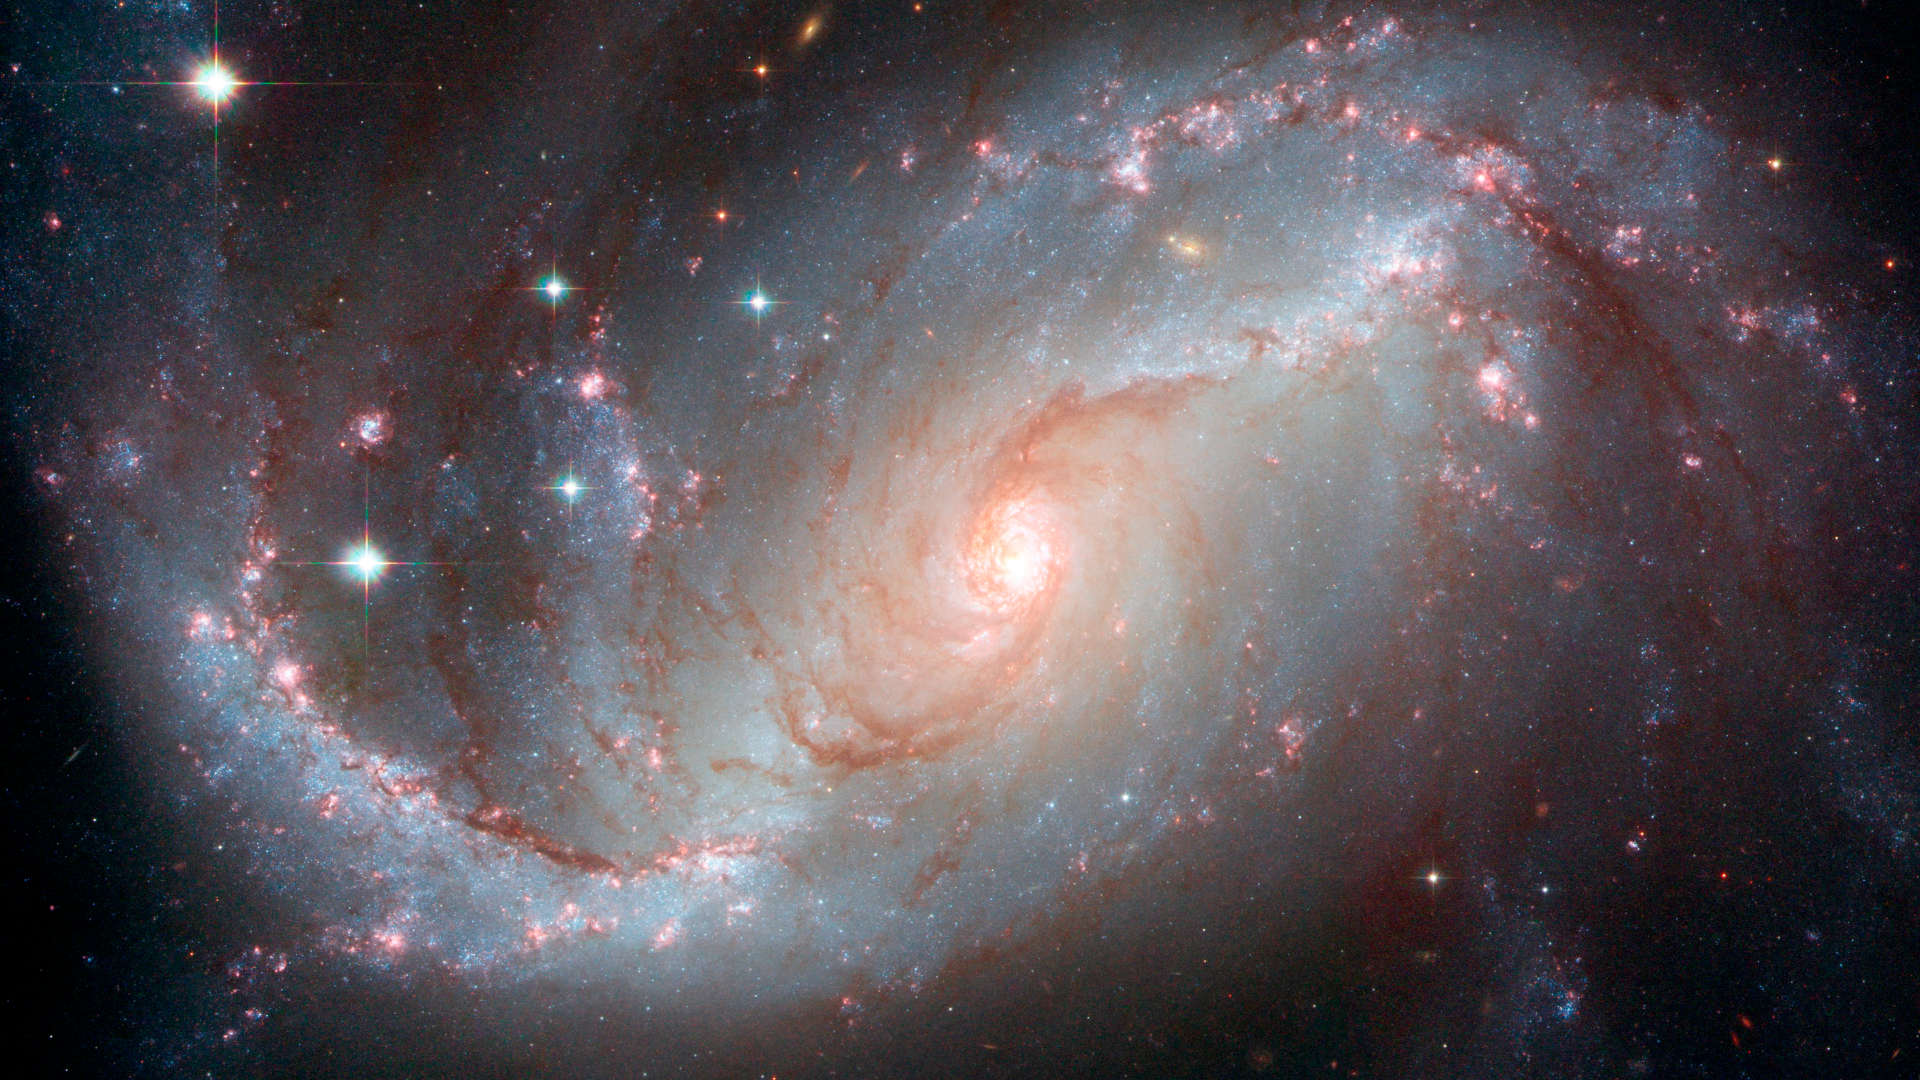 A Hubble Space Telescope image of the barred spiral galaxy known as NGC 1672, which is likely powered by a supermassive black hole at its center.